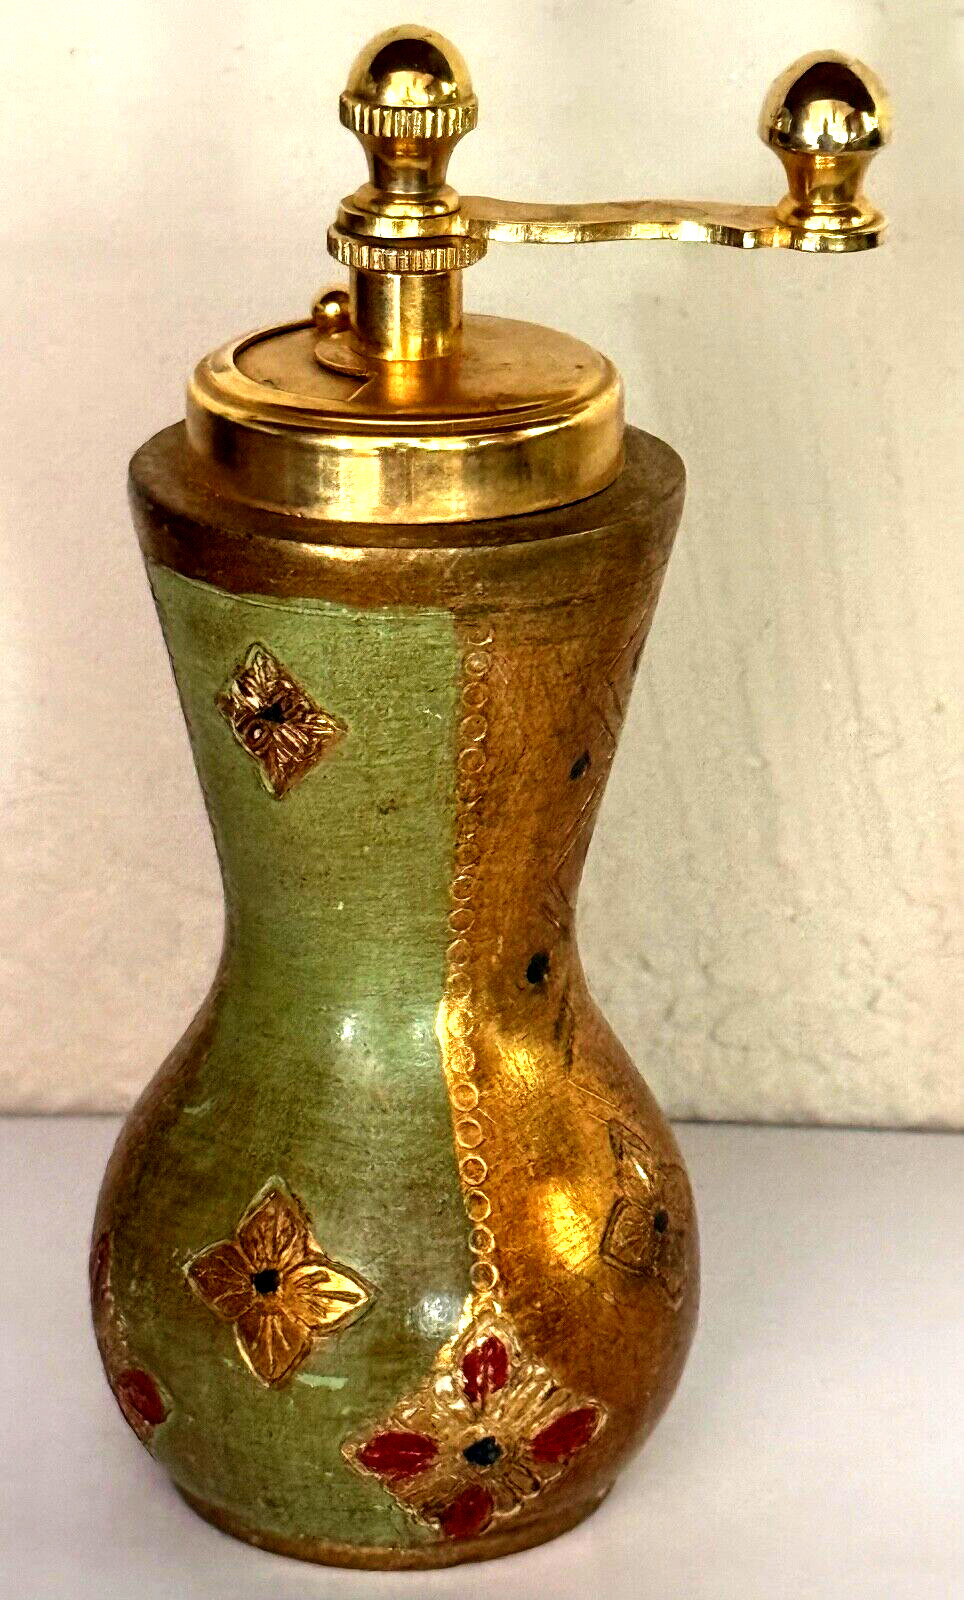 Vintage  Italian Pepper Mill (Shaker)  Florentine Red  & Gold Made in Italy